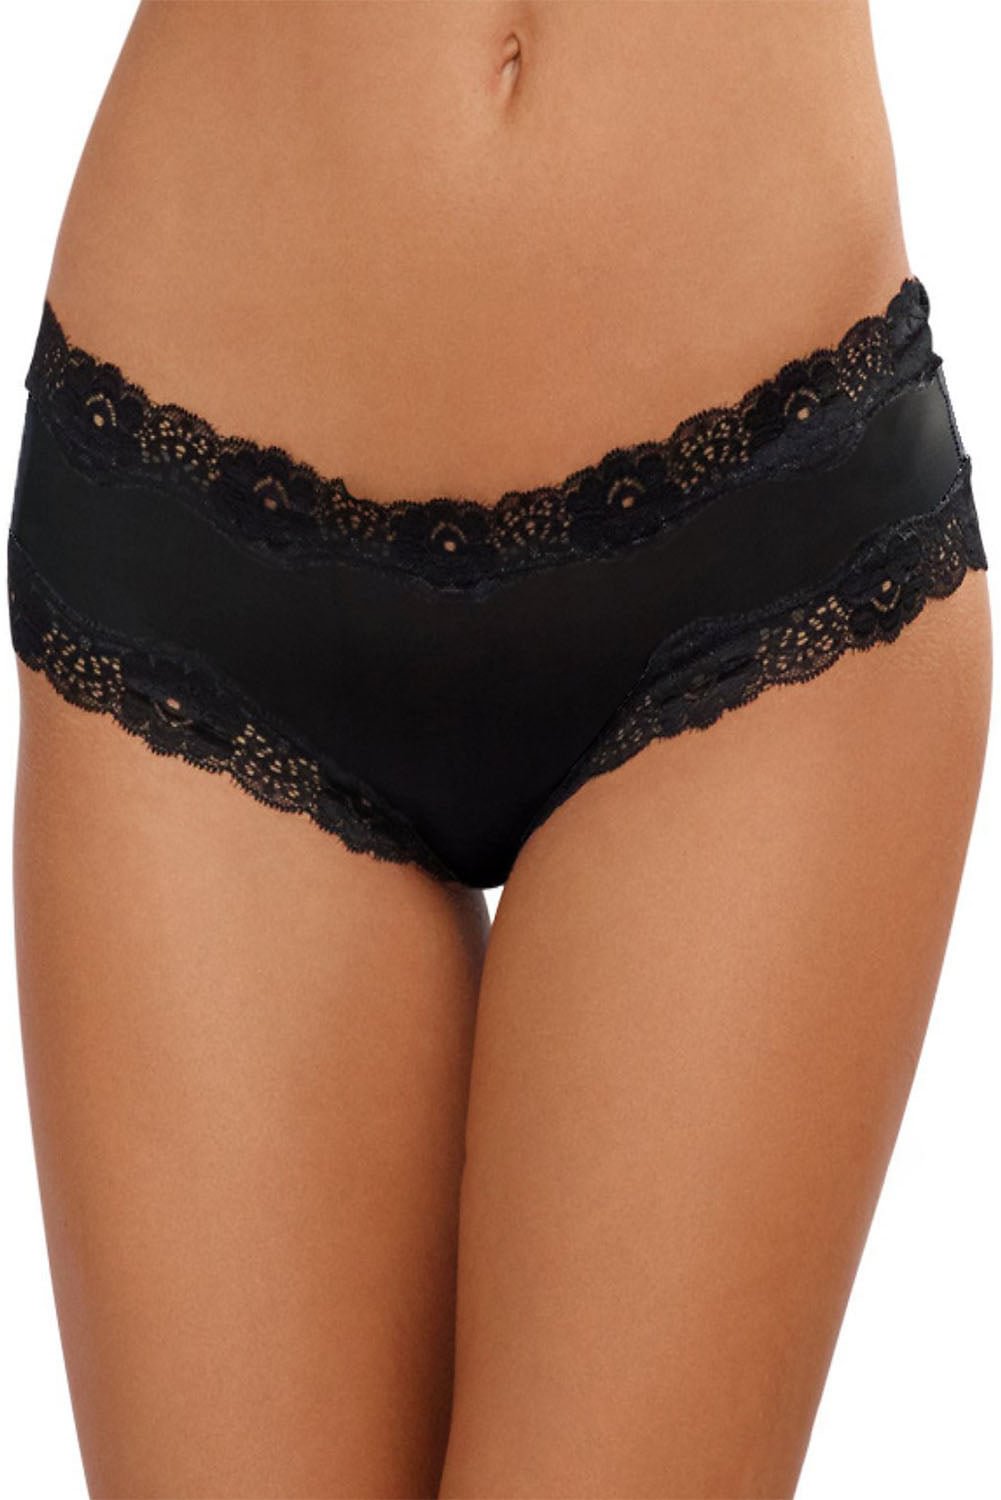 Buzzdaisy Hollow Out Lace Underwear